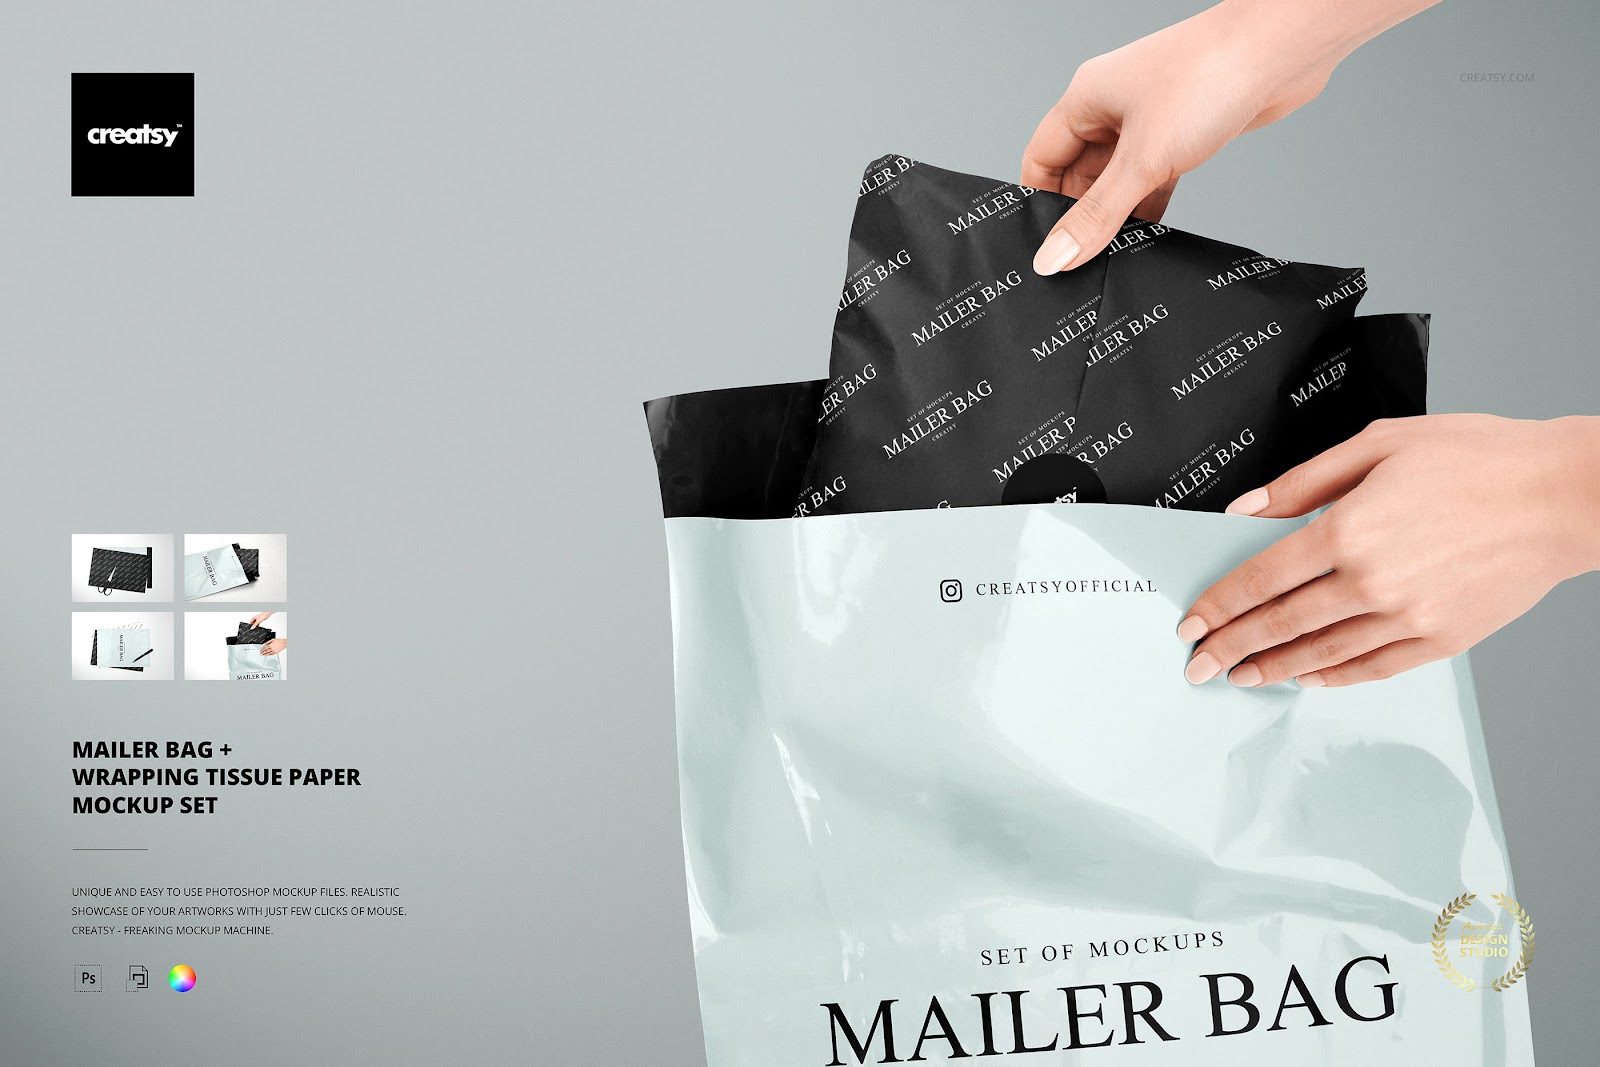 Download Mailer Box Tissue Paper Mockup Free Free Layered Svg Files Download Mailer Box Tissue Paper Mockup Free Free Layered Svg Files Just Add Your Own Custom Design Inside The Smart Object And Mailin